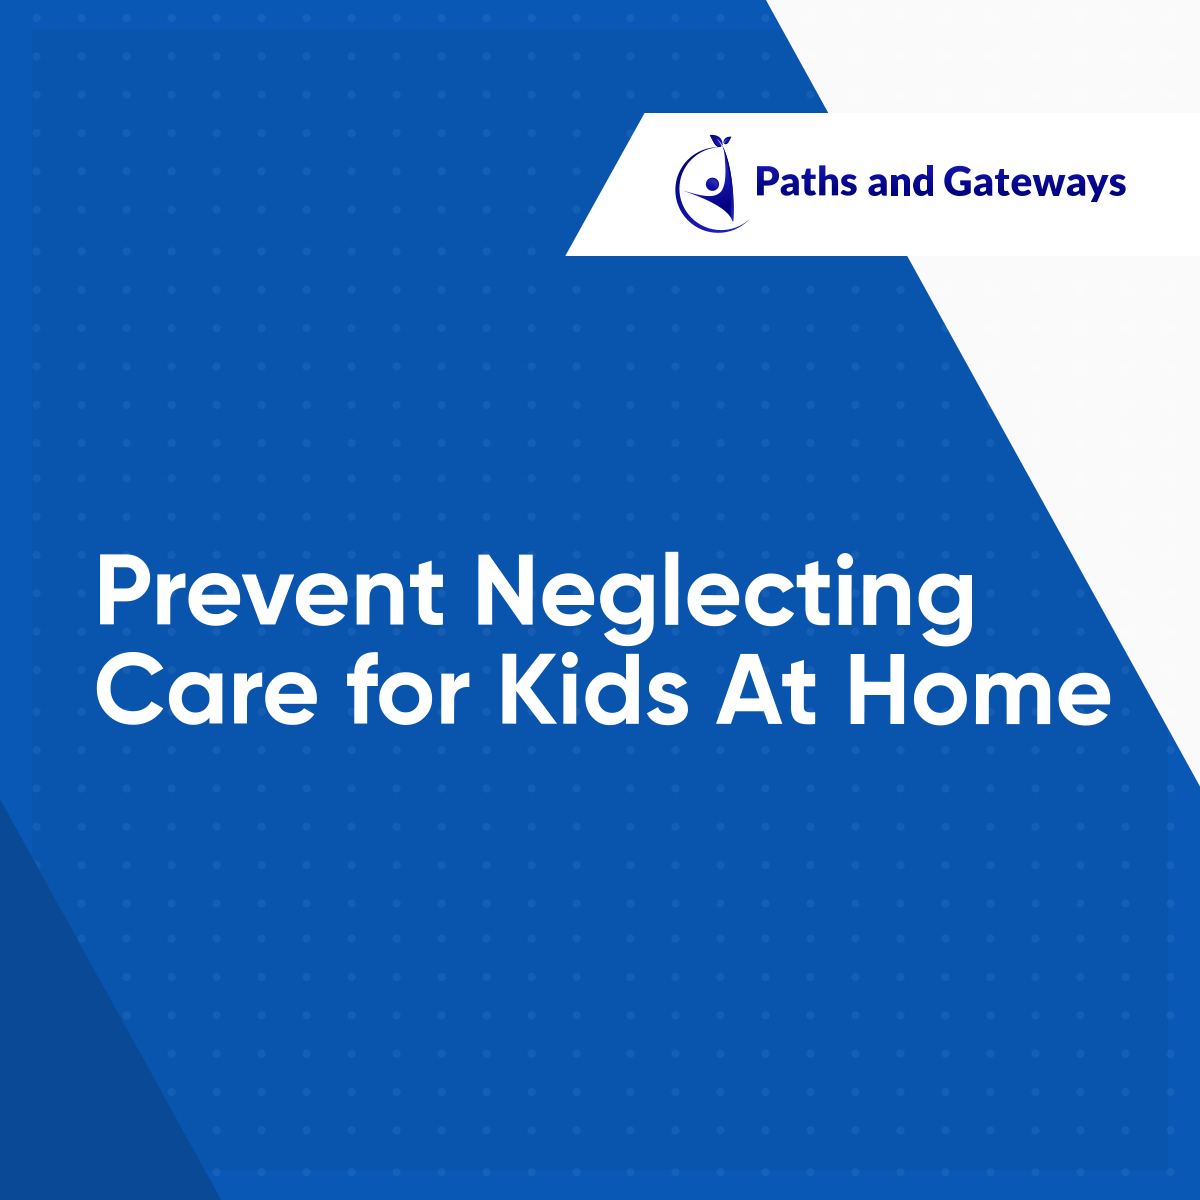 A lack of health care and proper sanitation can keep kids at home. Children might fall behind their classmates often and are more likely to drop out.

At Paths and Gateways, we provide hygiene and nutrition programs that can help. Contact us to join!

#Hygiene #NutritionPrograms